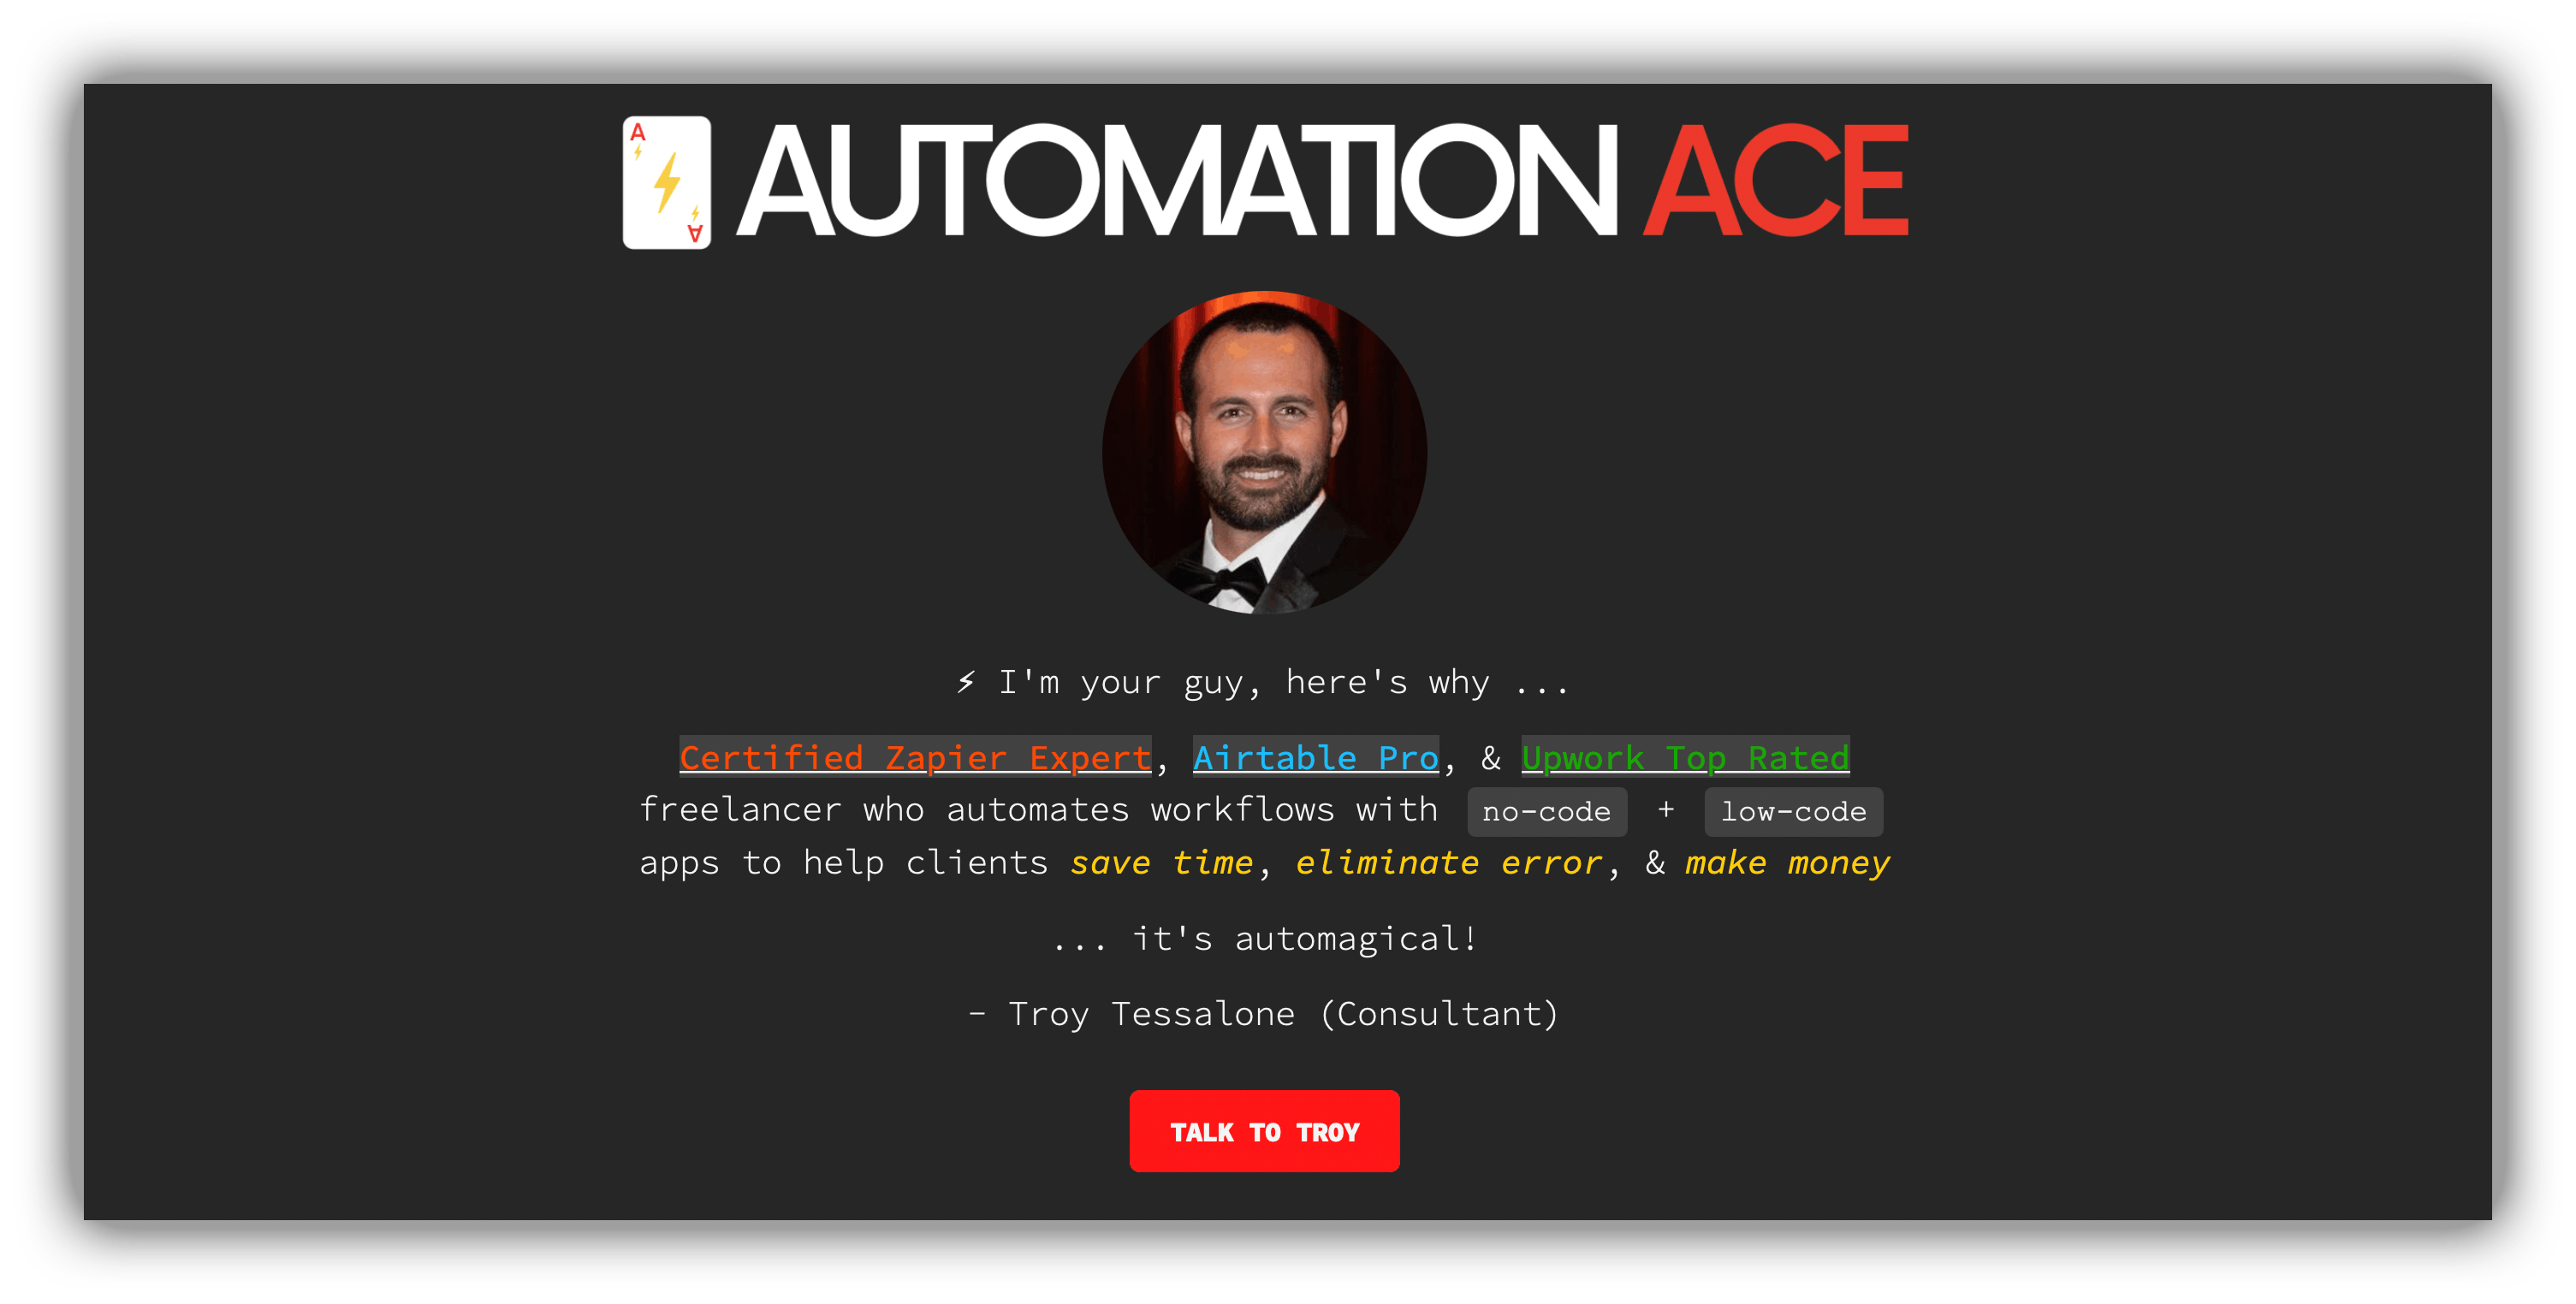 No-code agency Automation ace